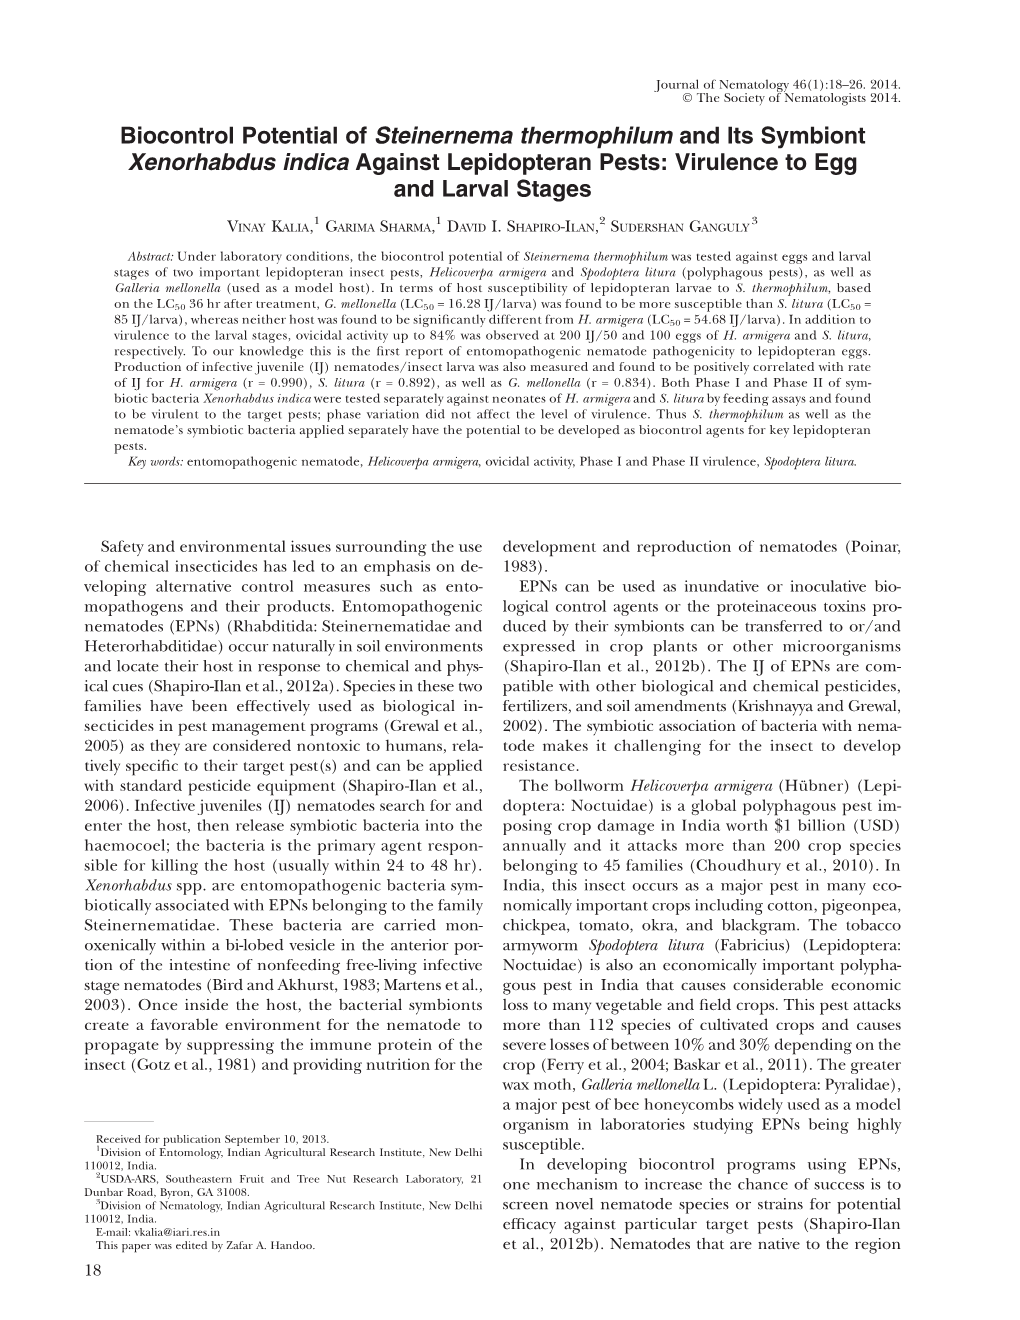 Biocontrol Potential of Steinernema Thermophilum and Its Symbiont Xenorhabdus Indica Against Lepidopteran Pests: Virulence to Egg and Larval Stages